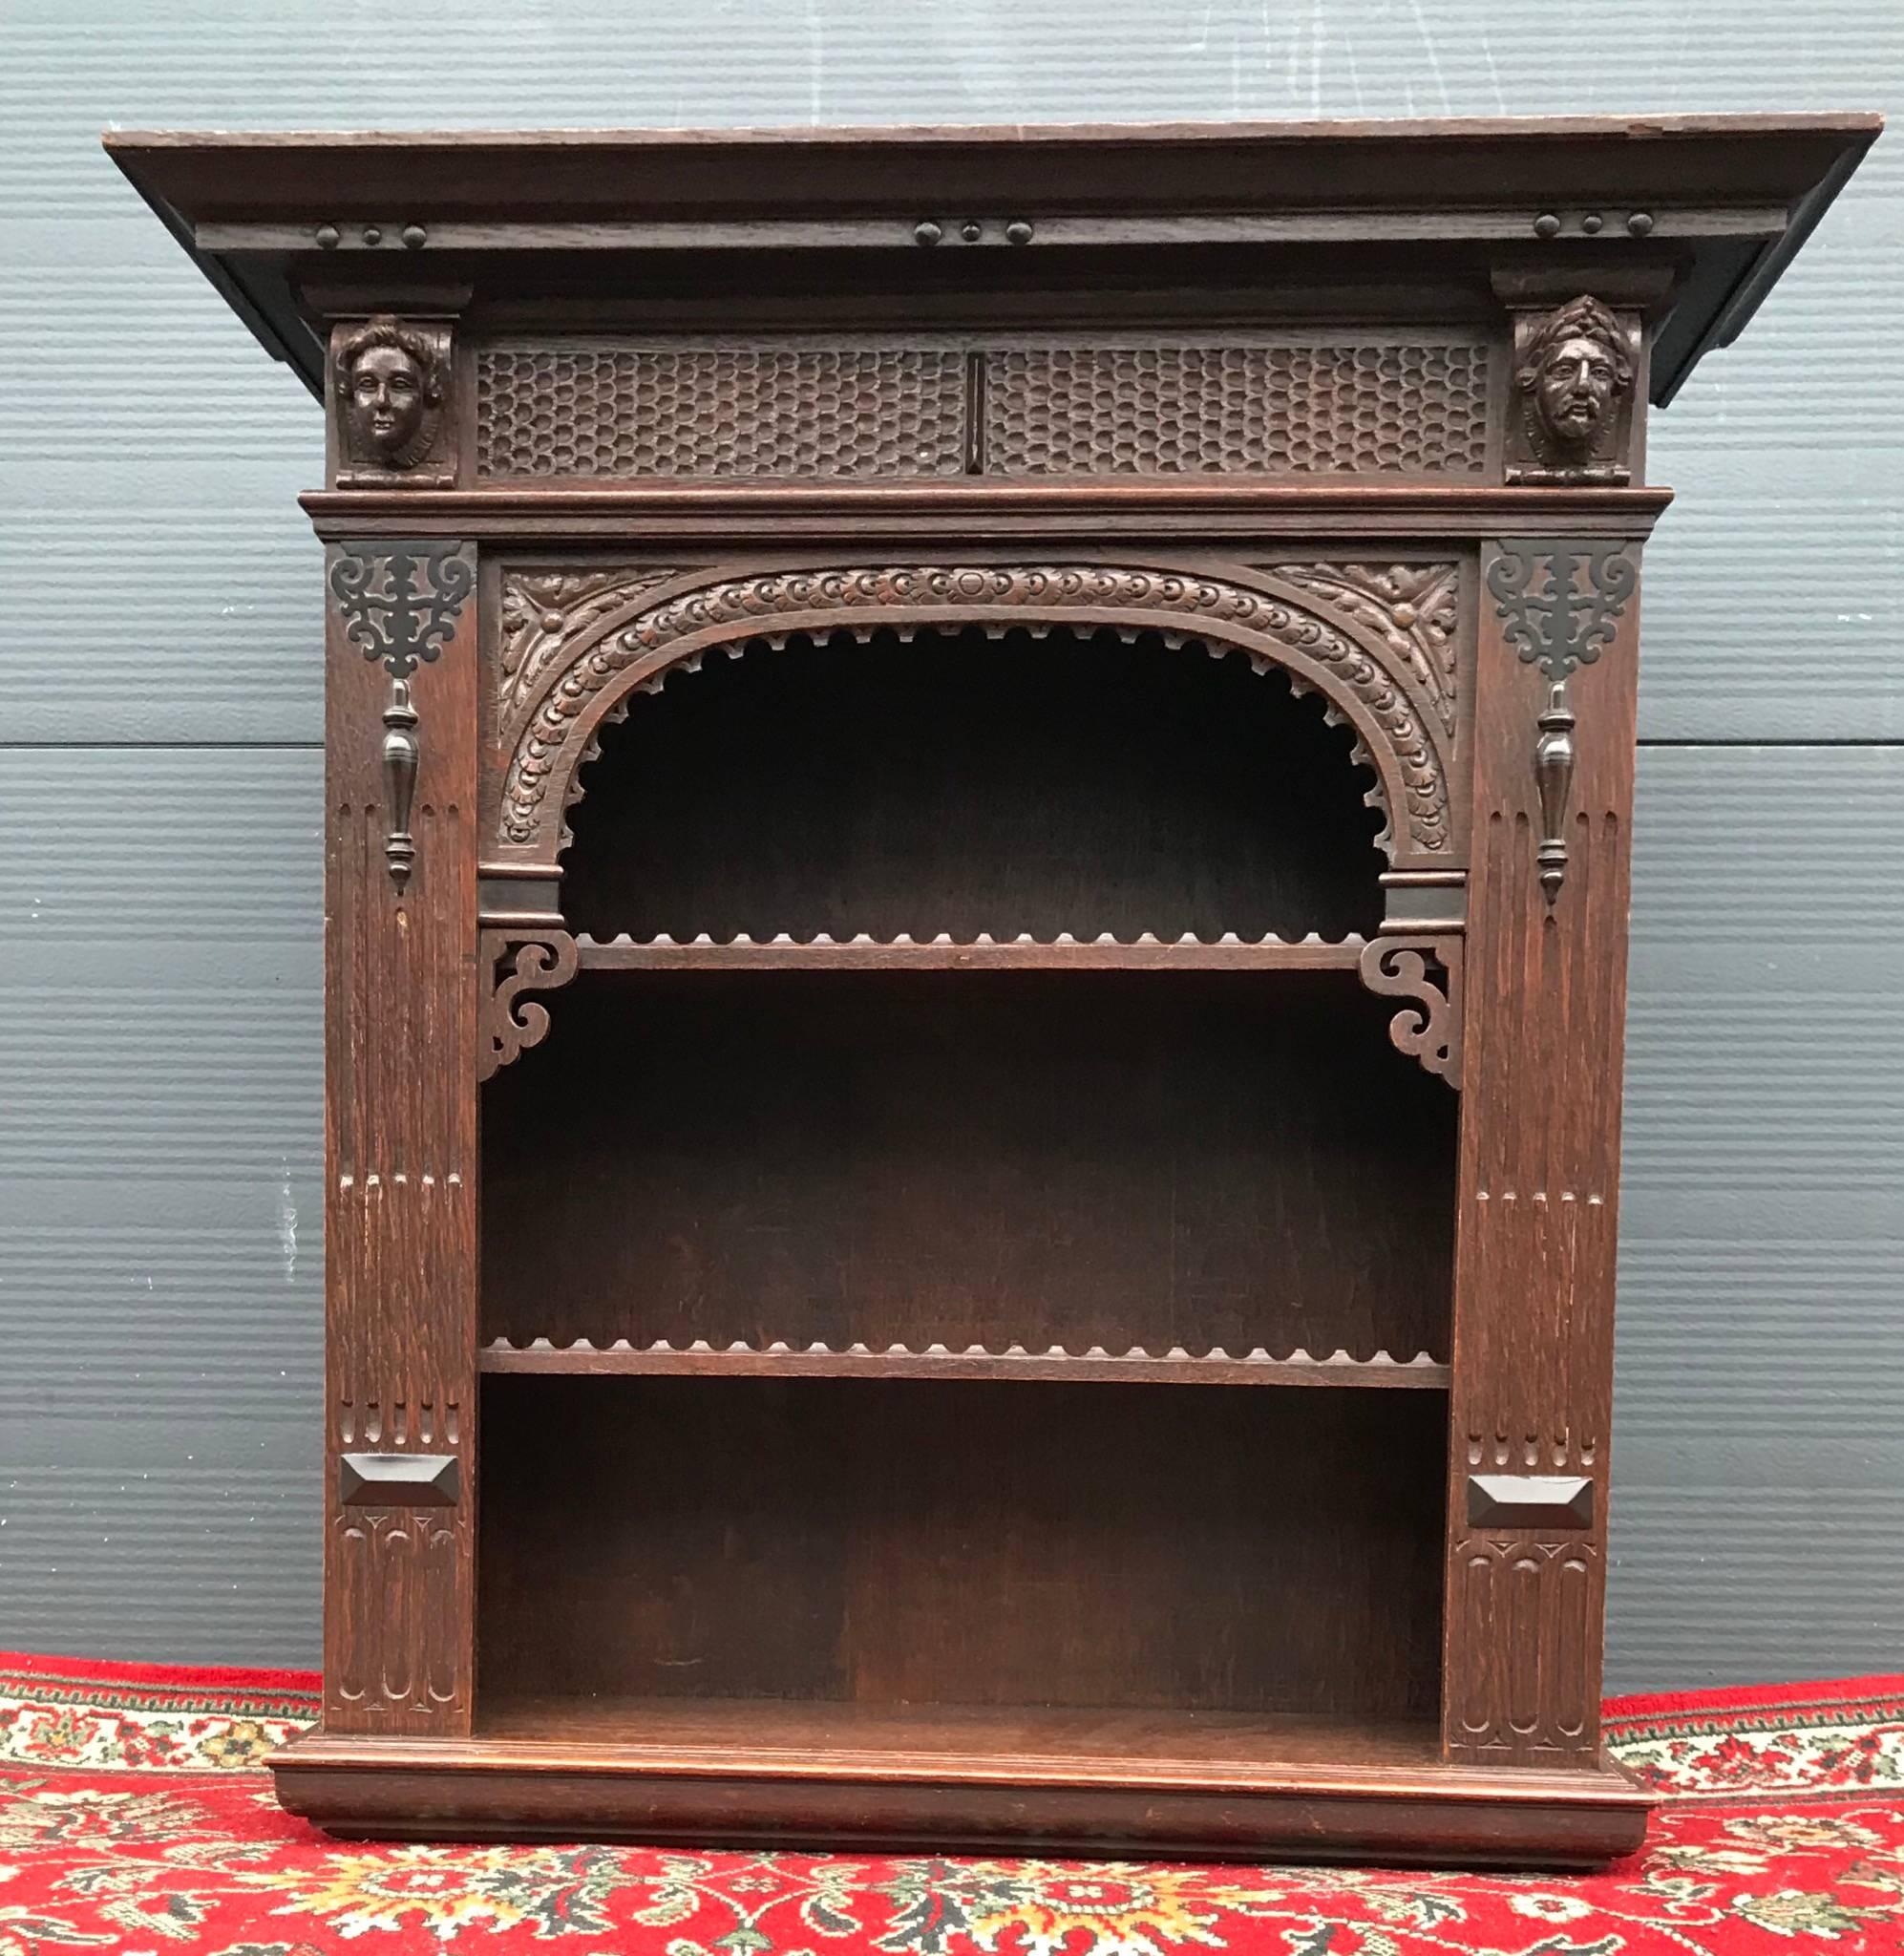 Beautiful handcrafted wall hanging cabinet with height adjustable shelves.

This 19th century open wall cabinet is a handcrafted work of art in its own right and it is in excellent condition. This good sized antique is entirely hand-carved out of